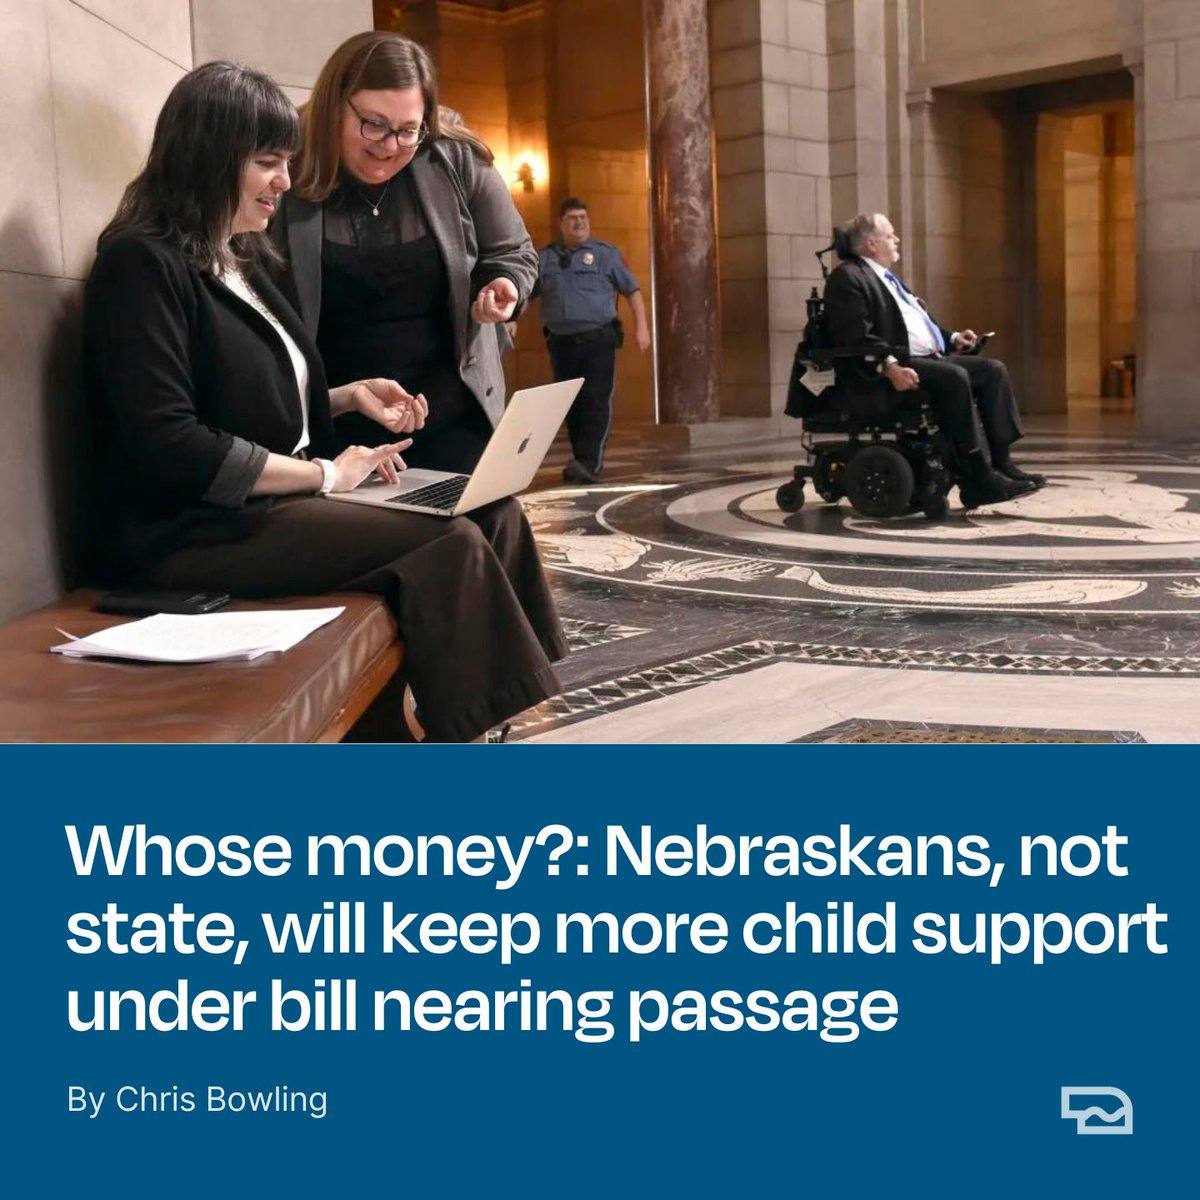 New @ FFP: Some of Nebraska’s poorest families will be helped by a potential new state law meant to funnel more child support money their way. Now, much of that money – $15.7 million in the past decade – is kept by the state itself. Read more: buff.ly/4asHl7X